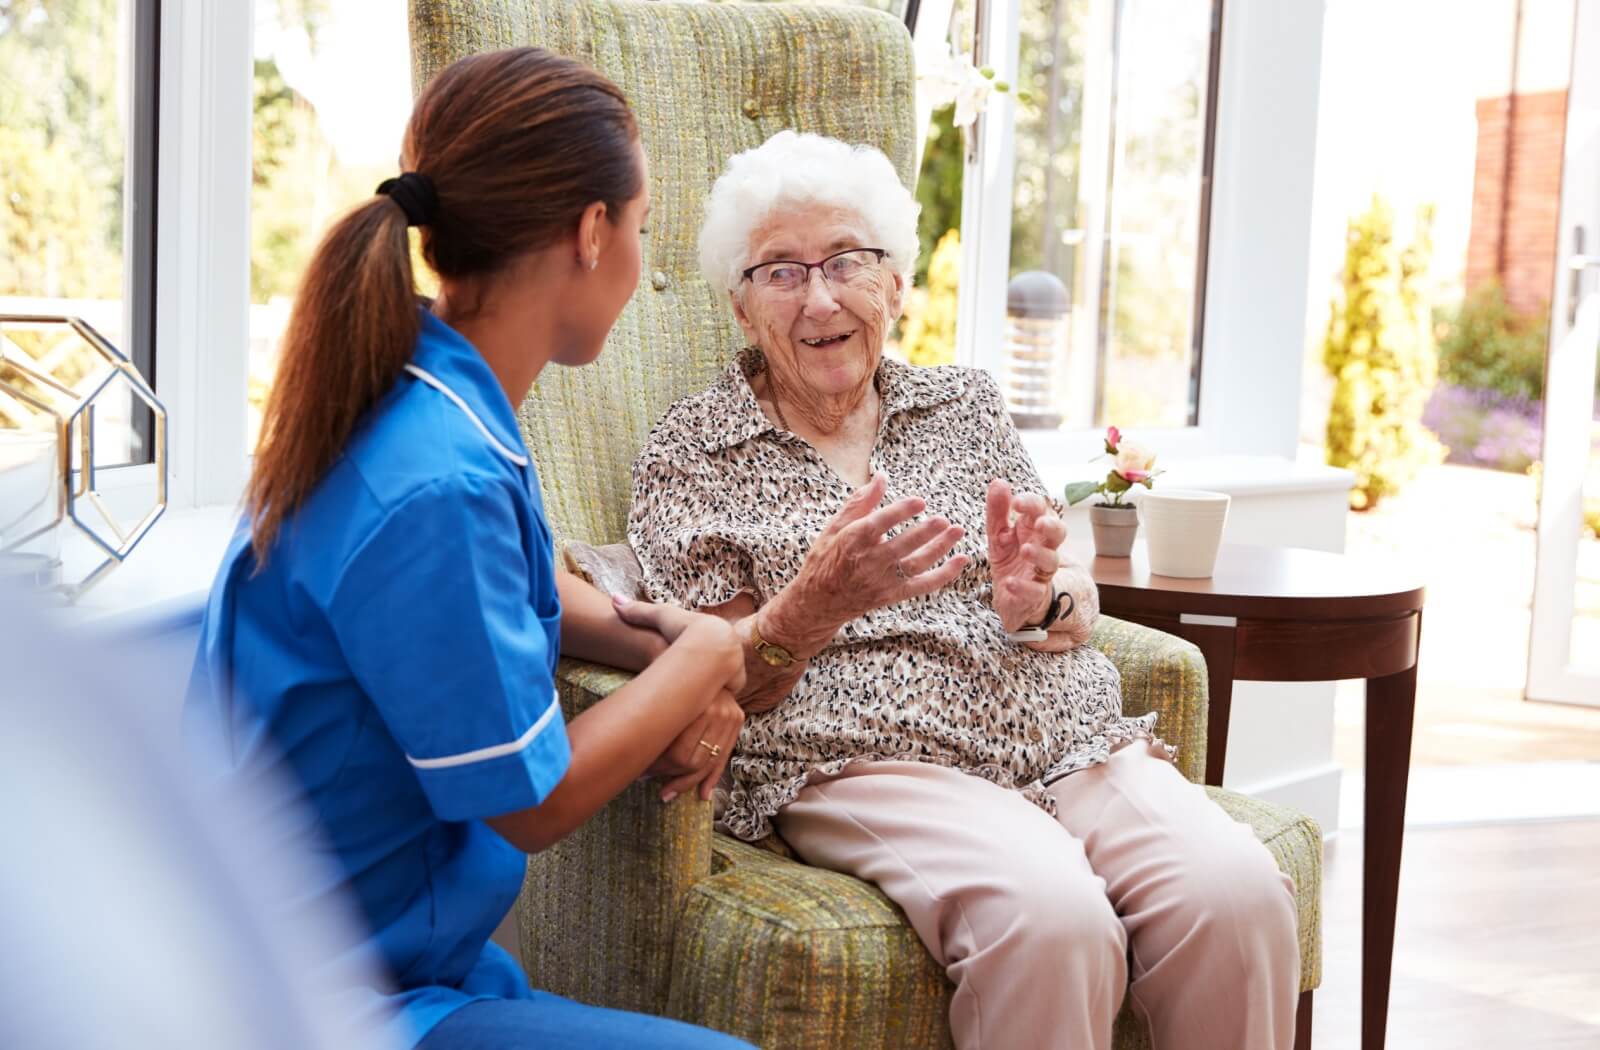 An older adult woman in a memory care facility sitting on a chair smiling and having a conversation with a nurse.